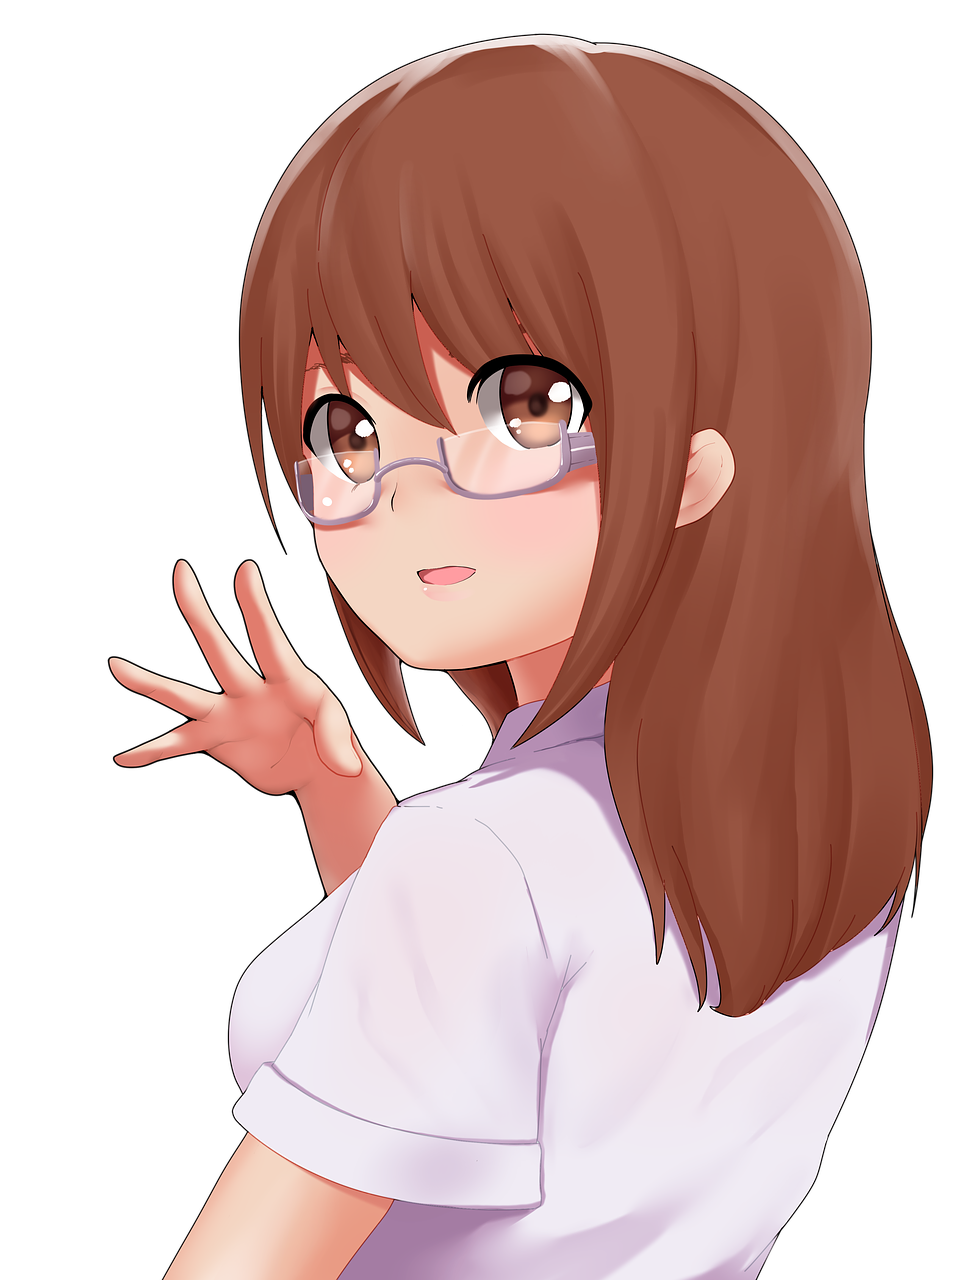 a close up of a person wearing glasses, inspired by Un'ichi Hiratsuka, pixiv, anime style. 8k, hands behind her body pose!, cel - shaded art style, brown hair and bangs